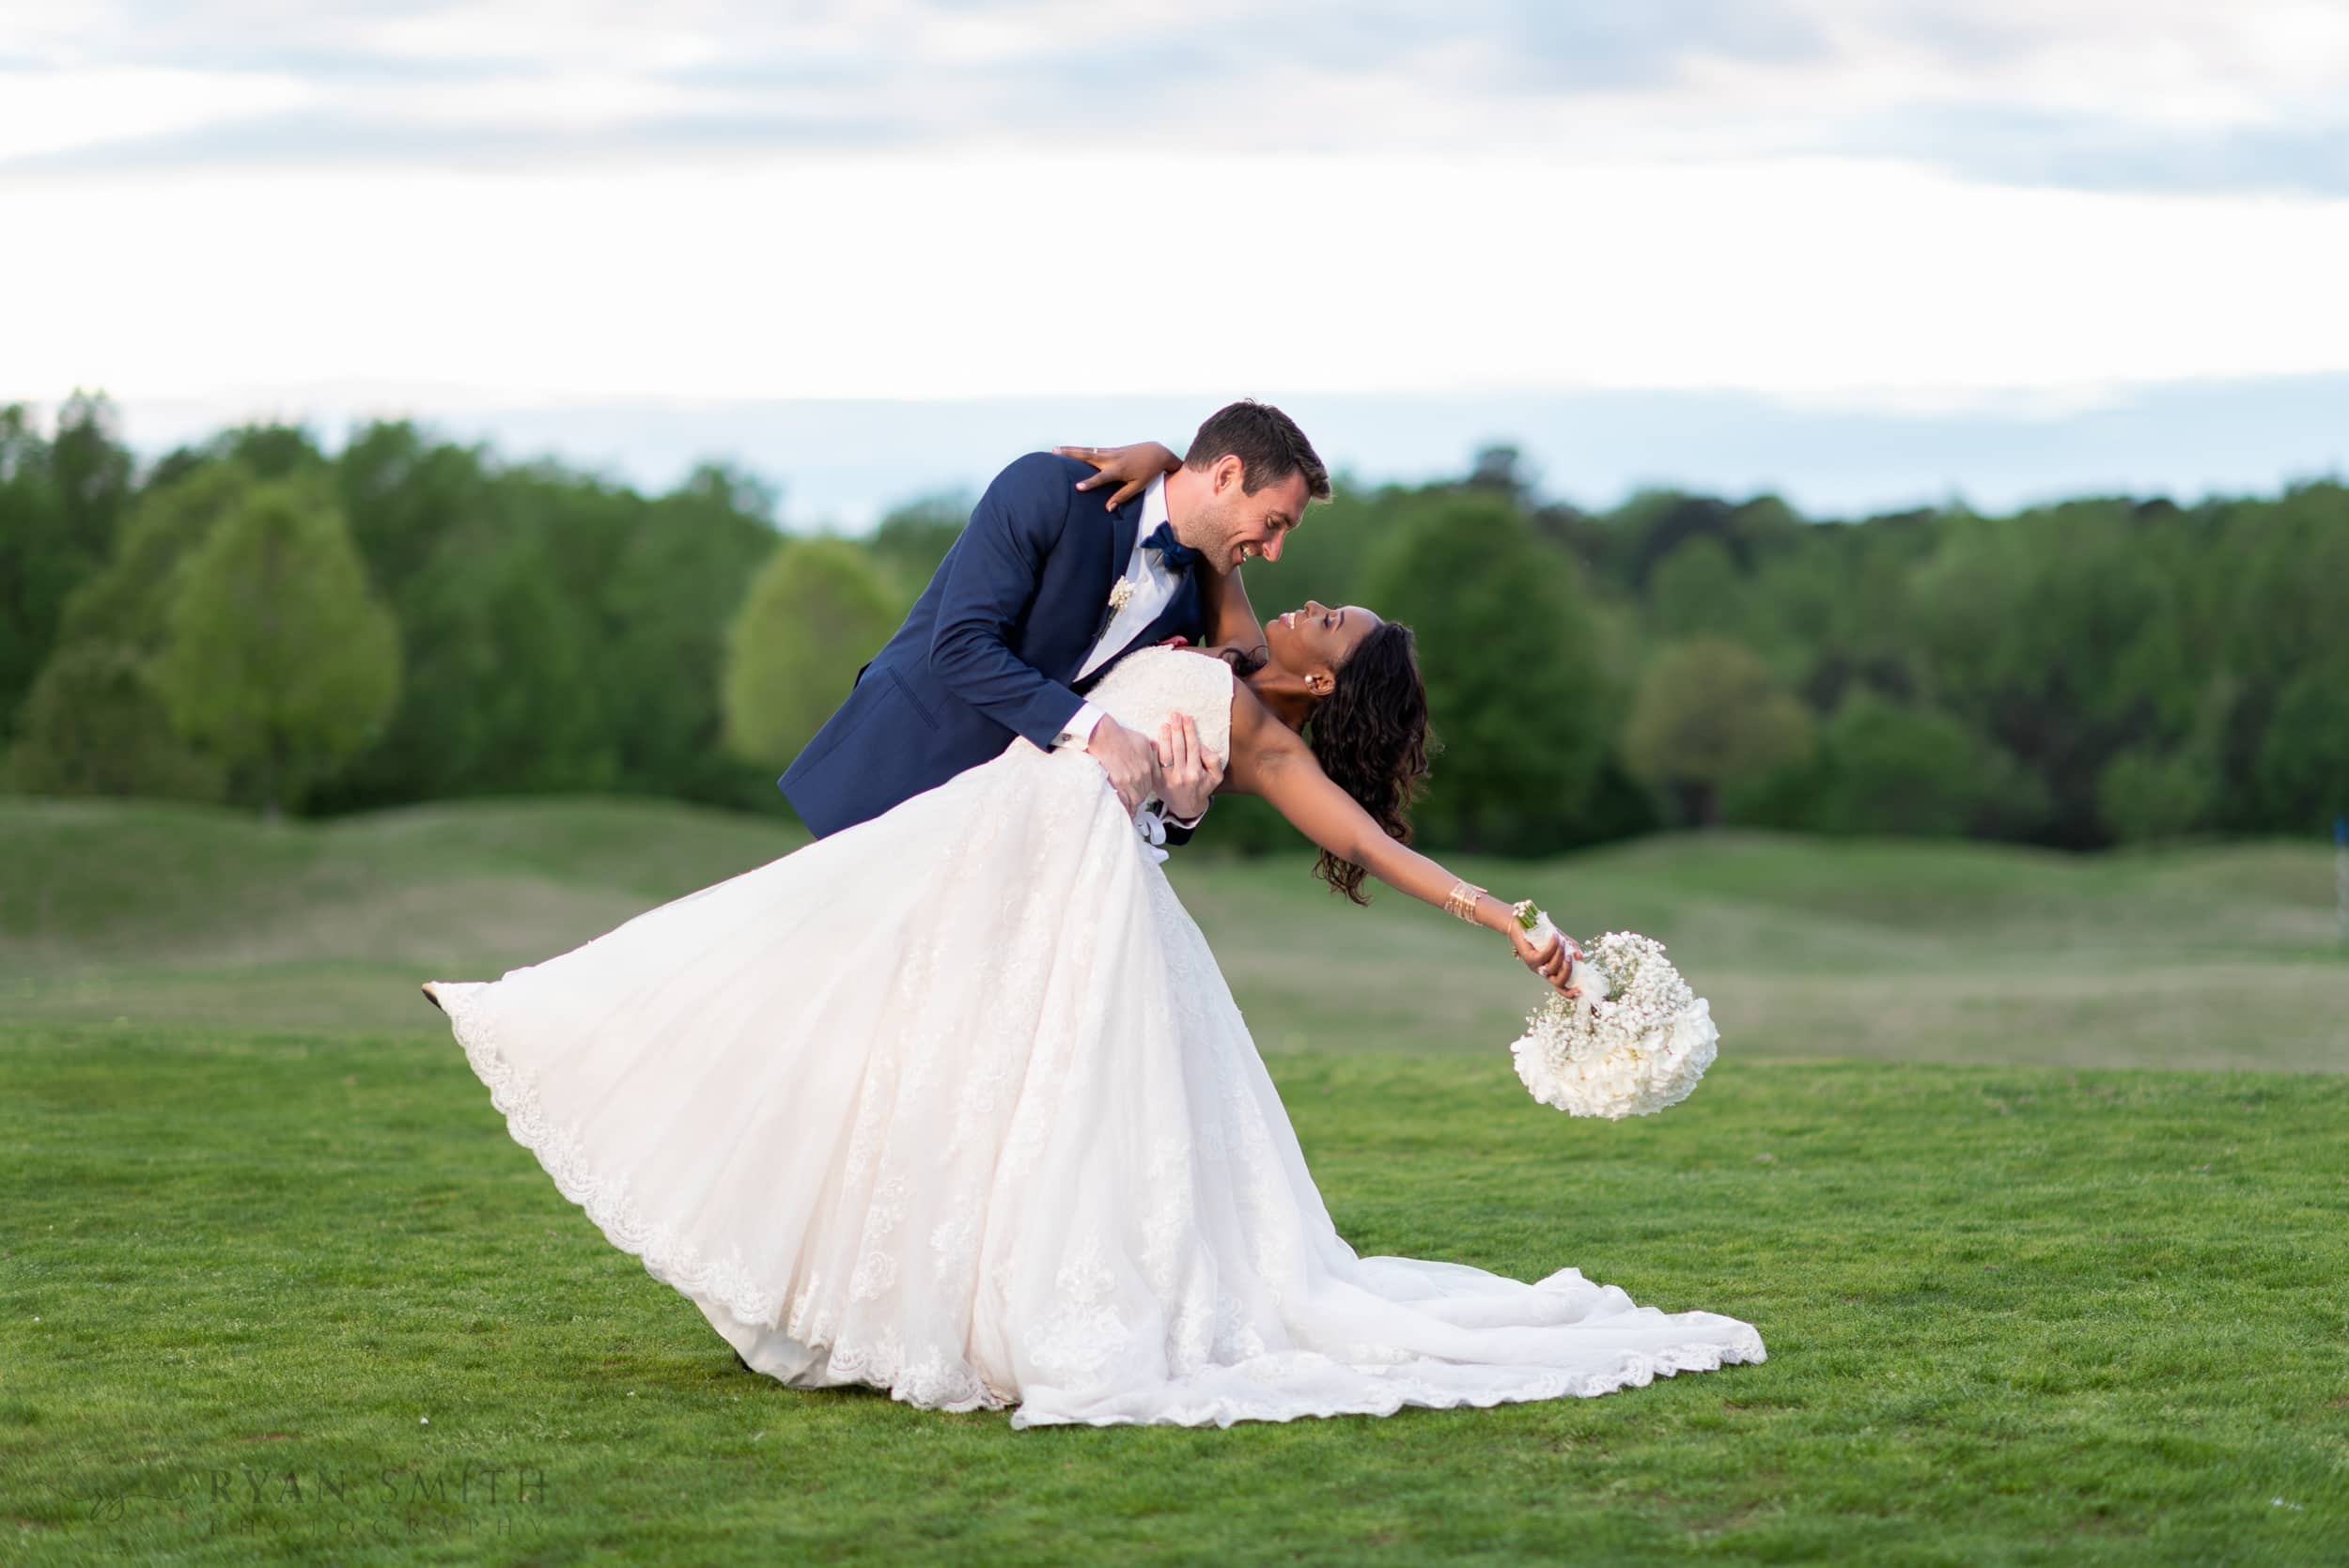 Dip back for a kiss on the golf course - River Ridge Golf Club